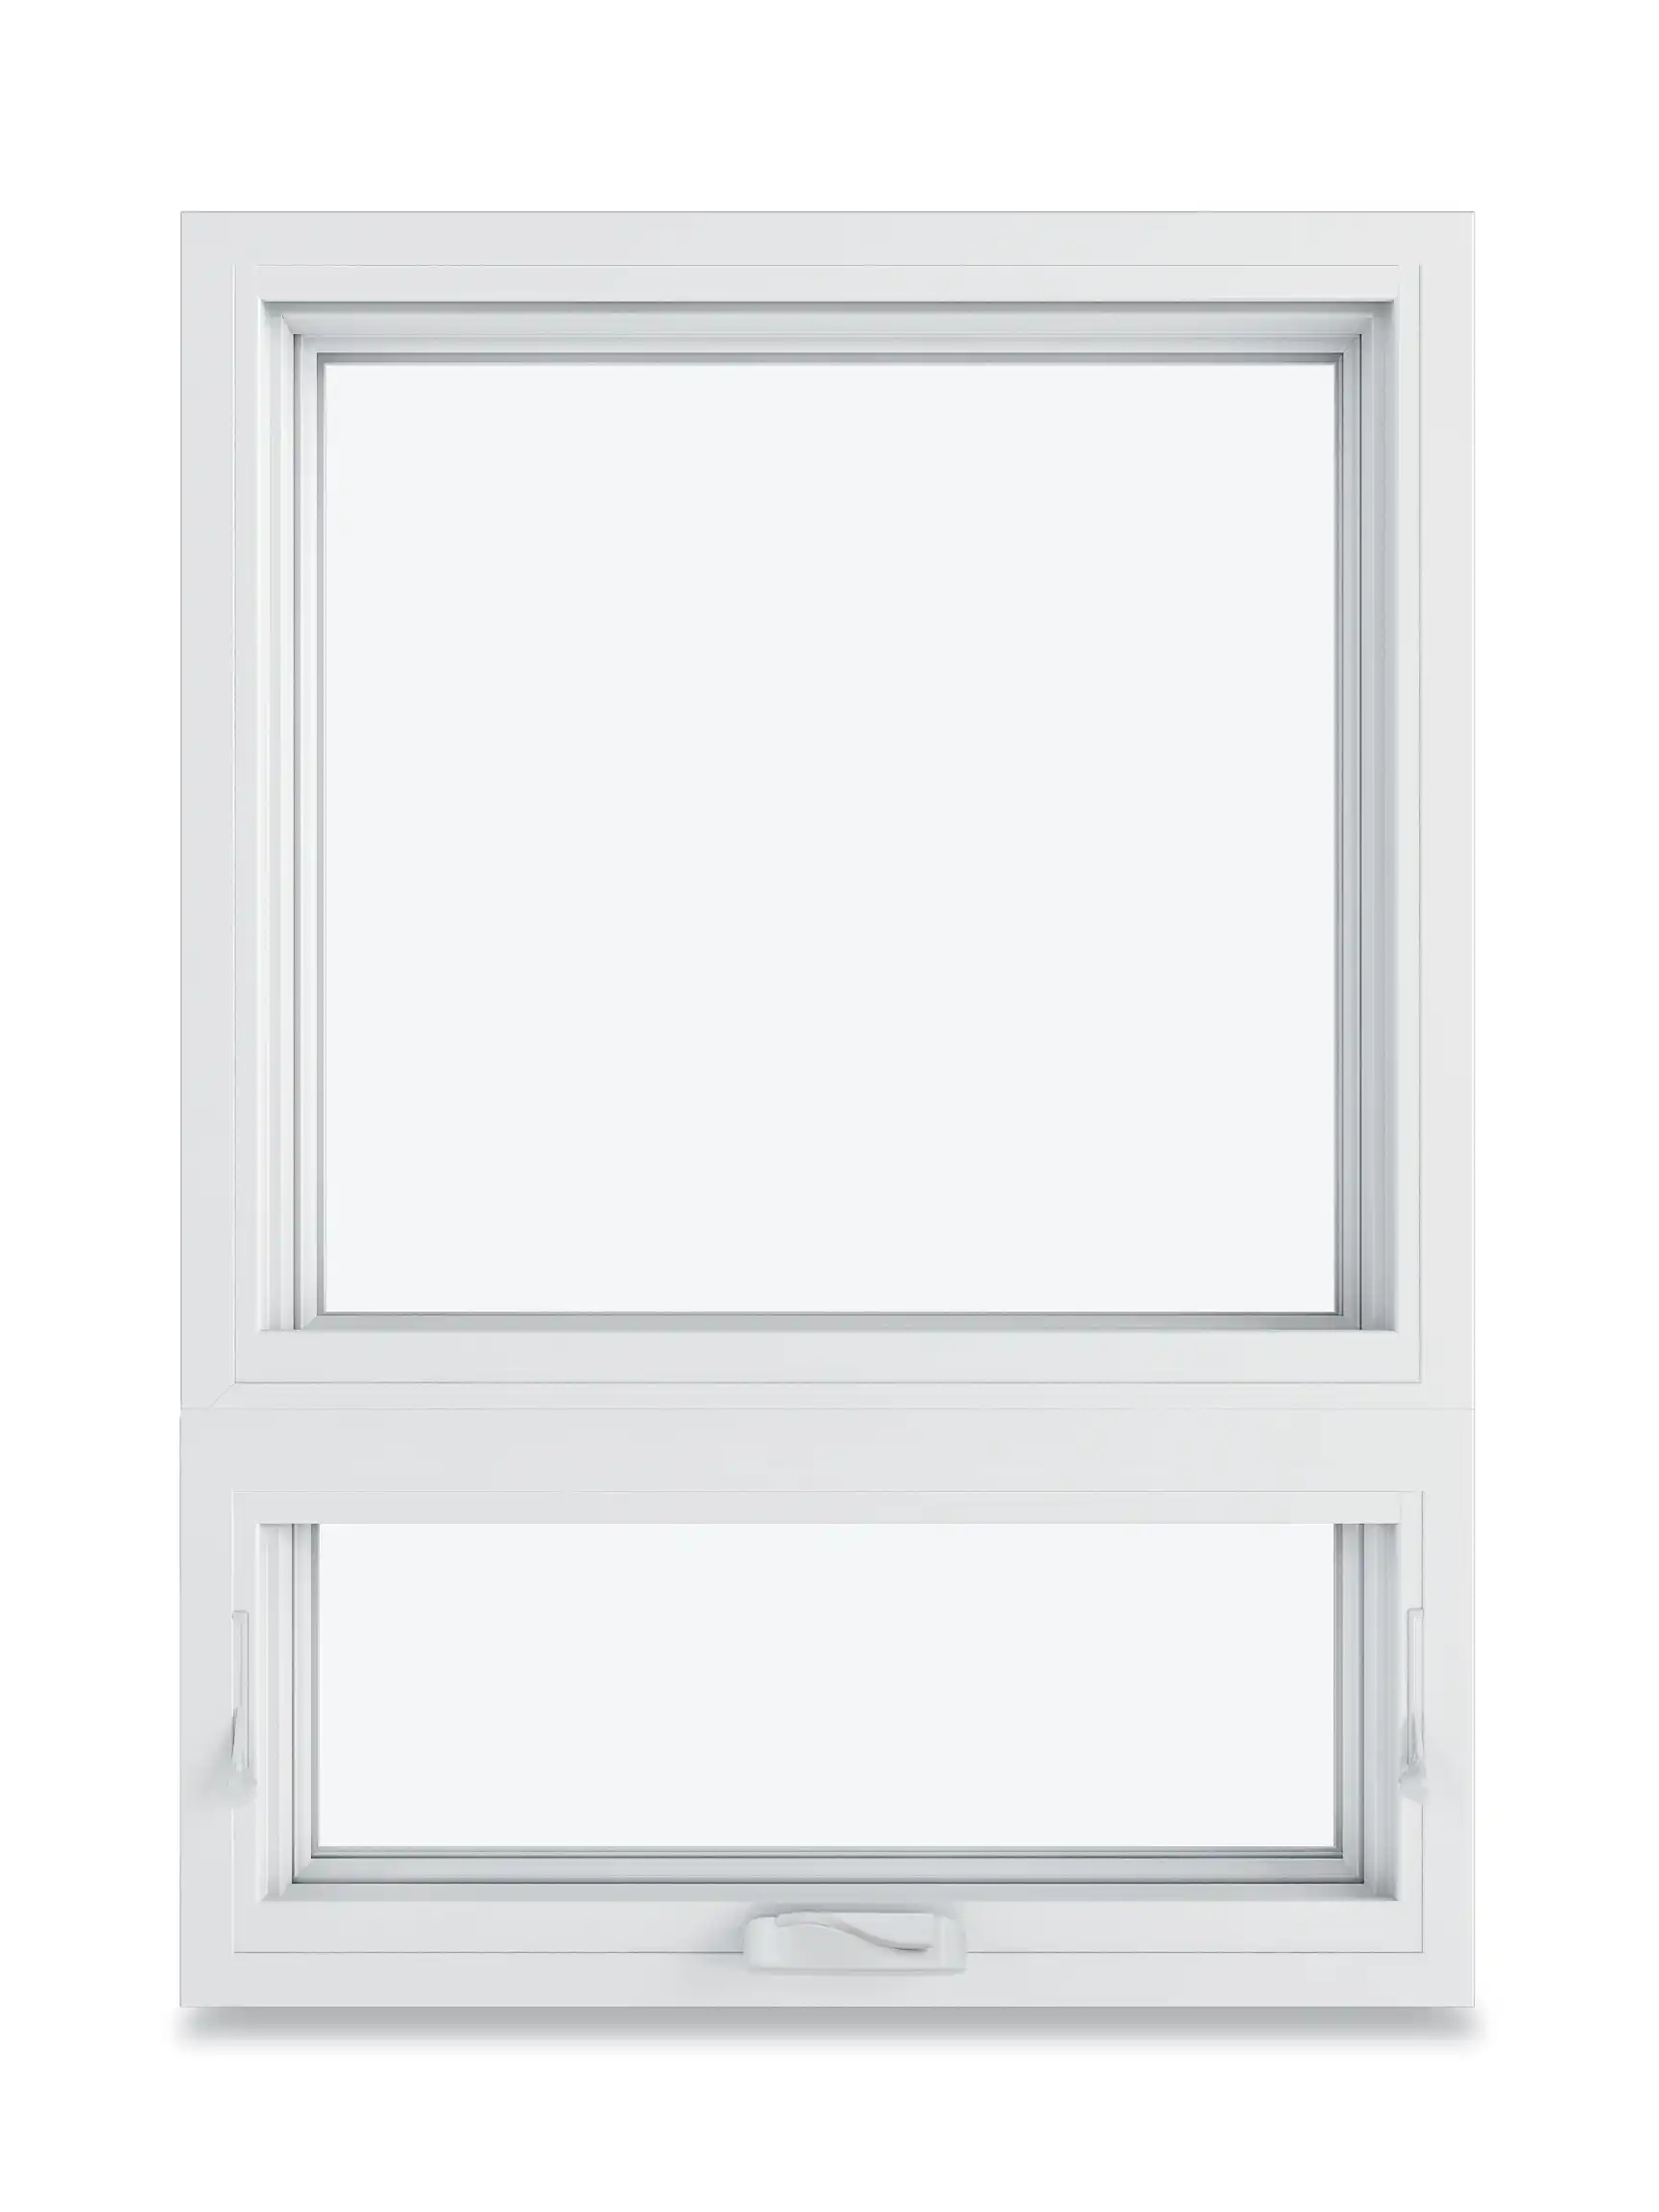 Image of a White Marvin Replacement Awning window below a Picture window.